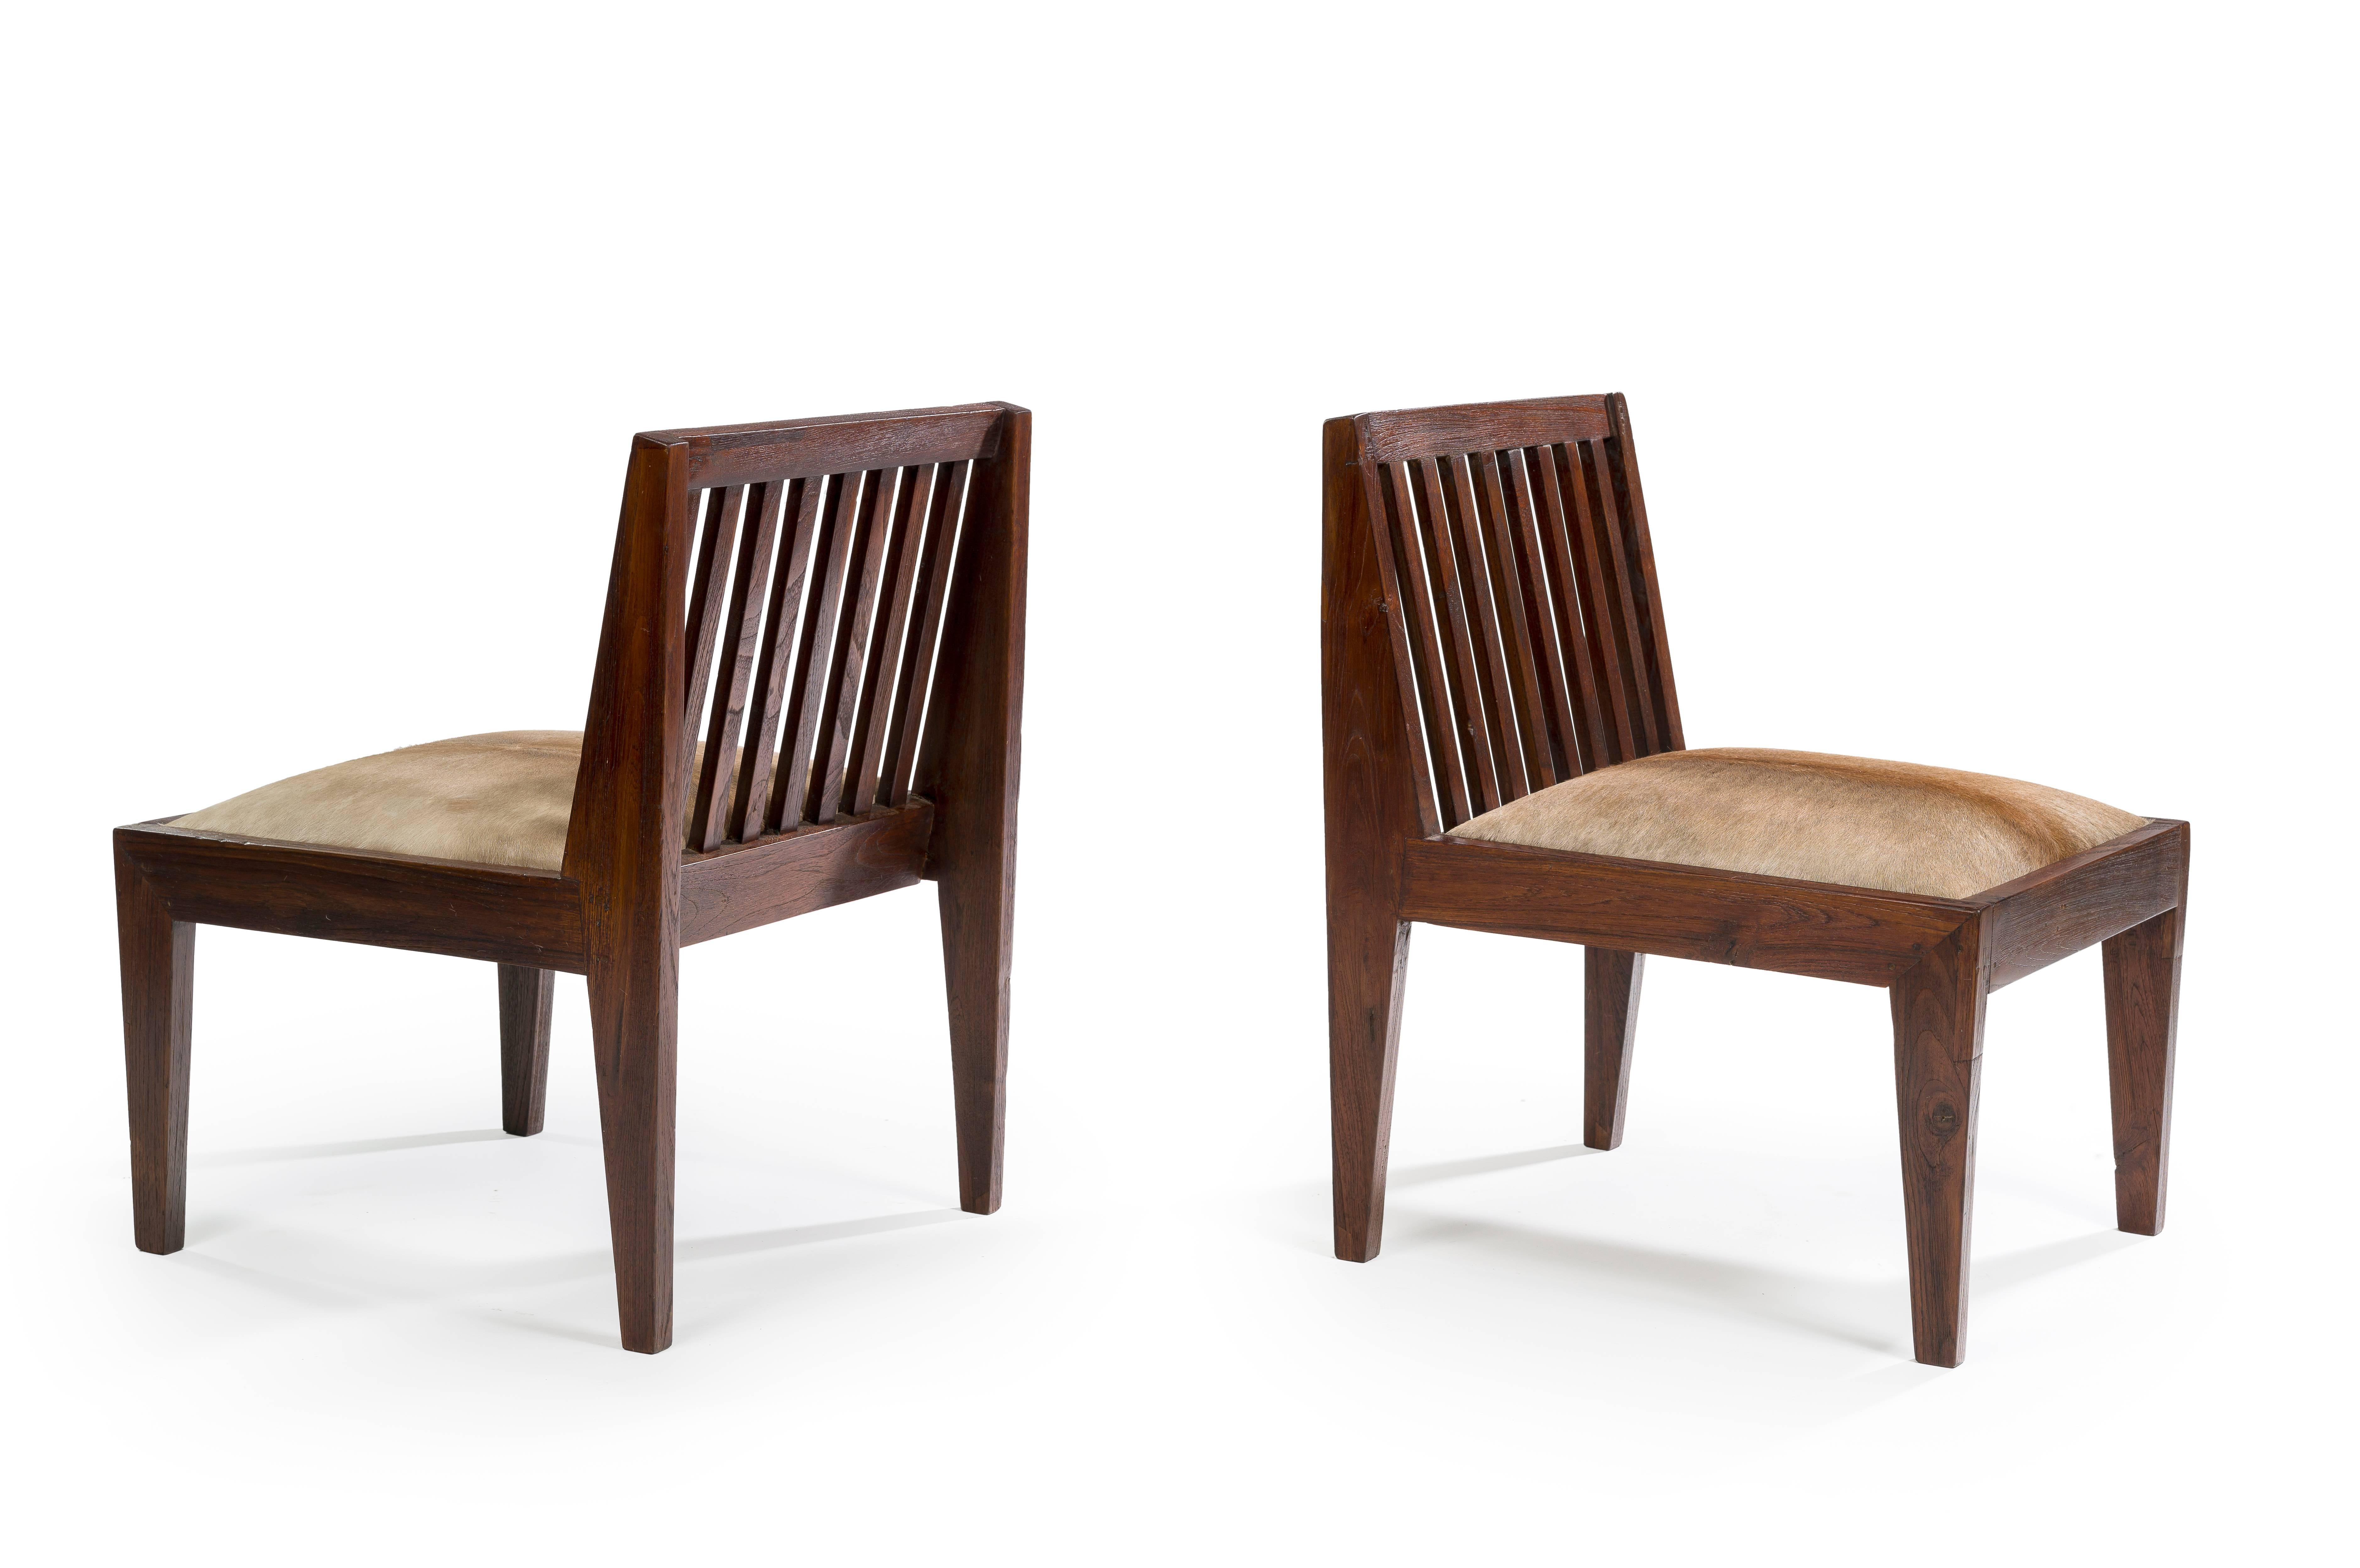 Indian Pierre Jeanneret, Chauffeuses Pair